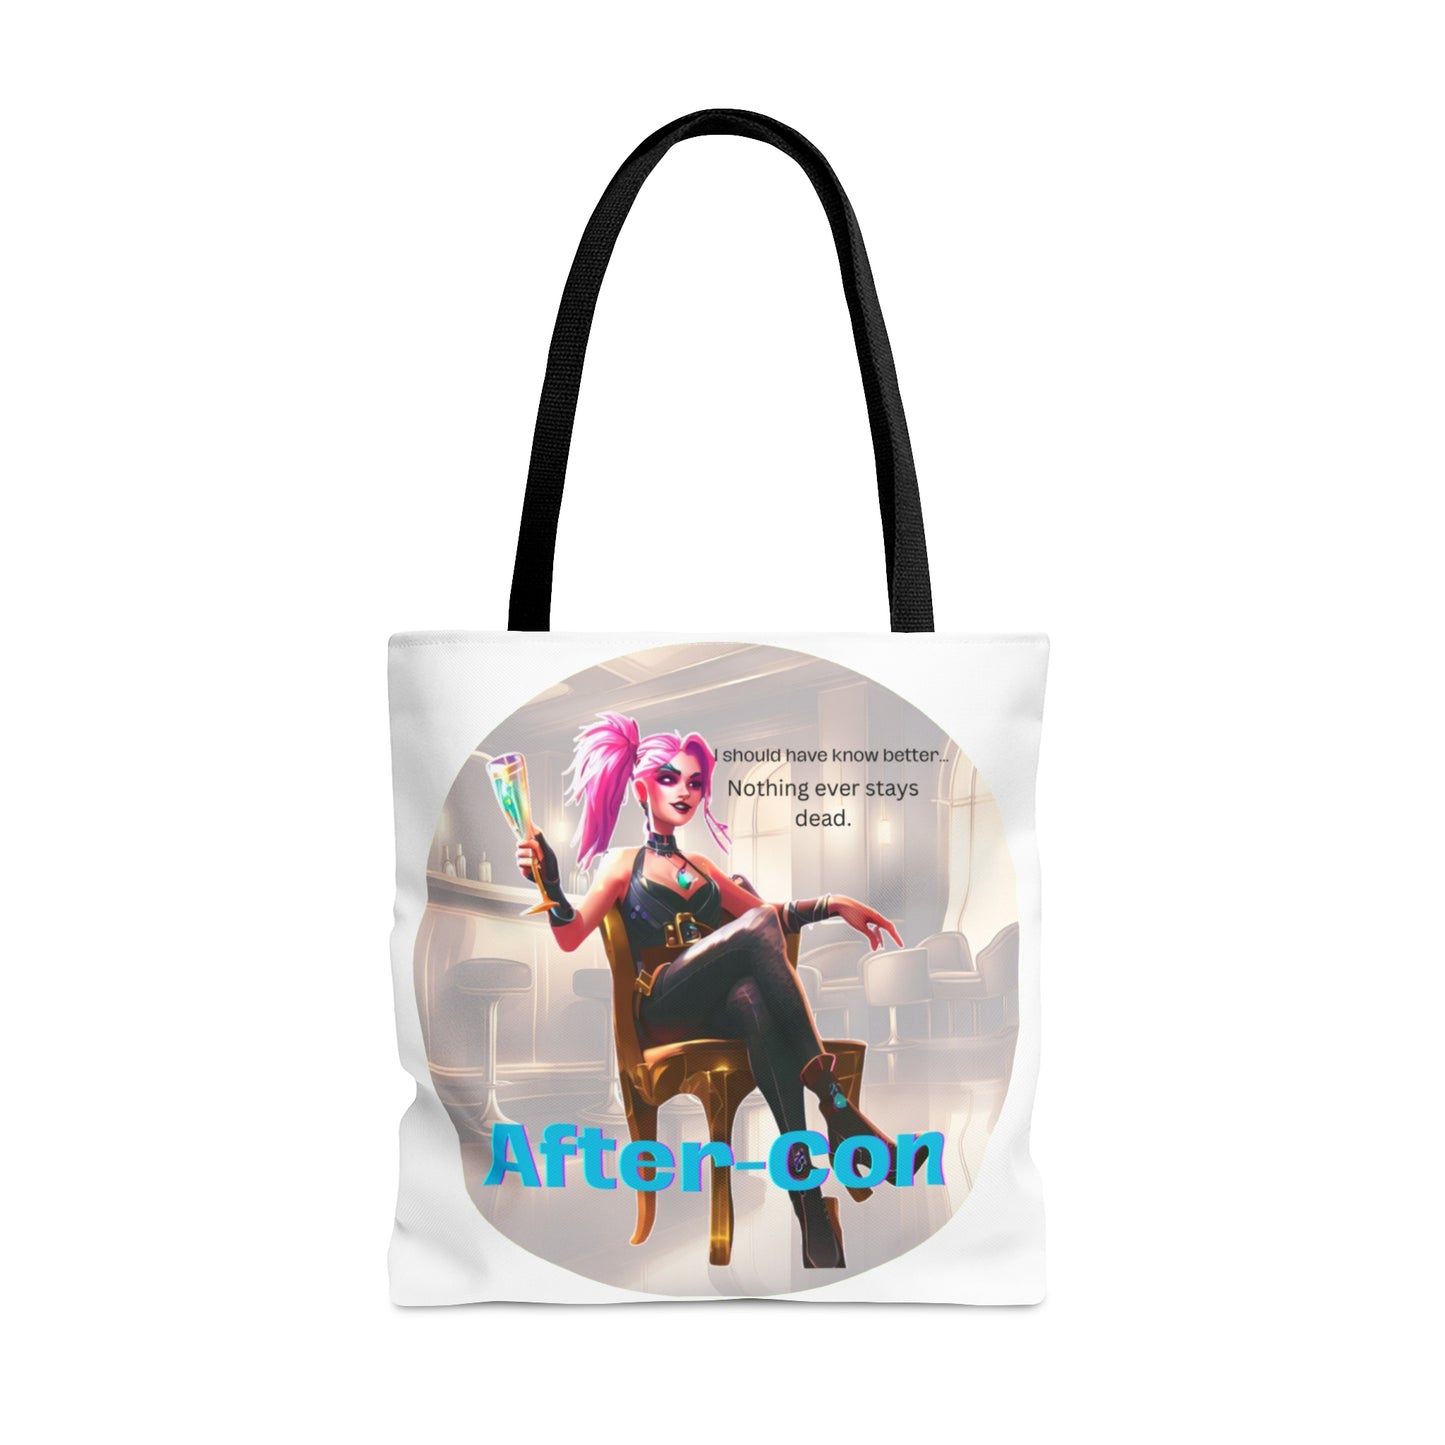 After-Con "Nothing ever stays..." Tote Bag